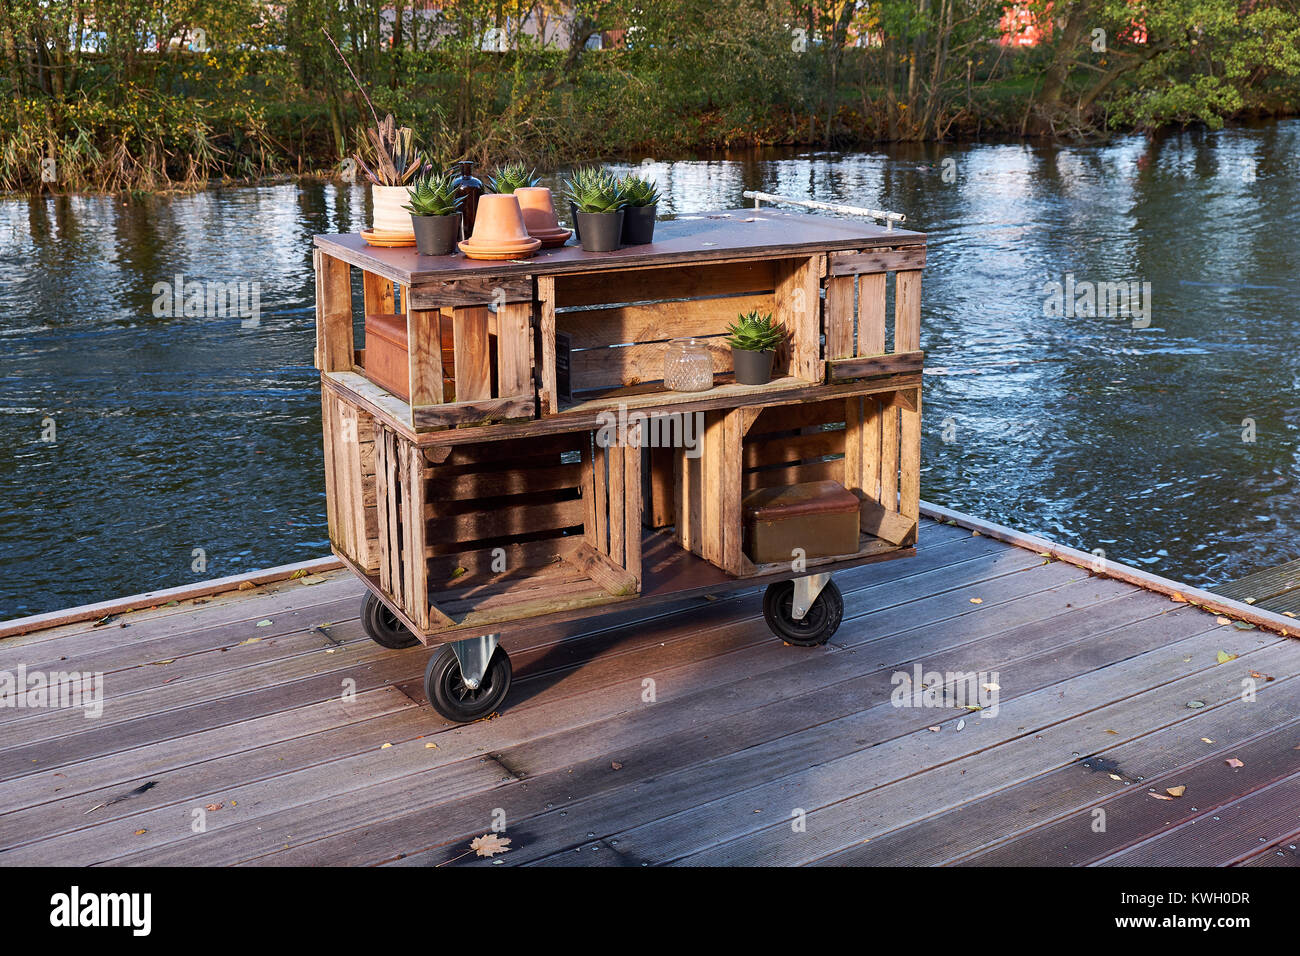 Home made storage furniture of wood boxes standing on a wooden jetty by a river Stock Photo